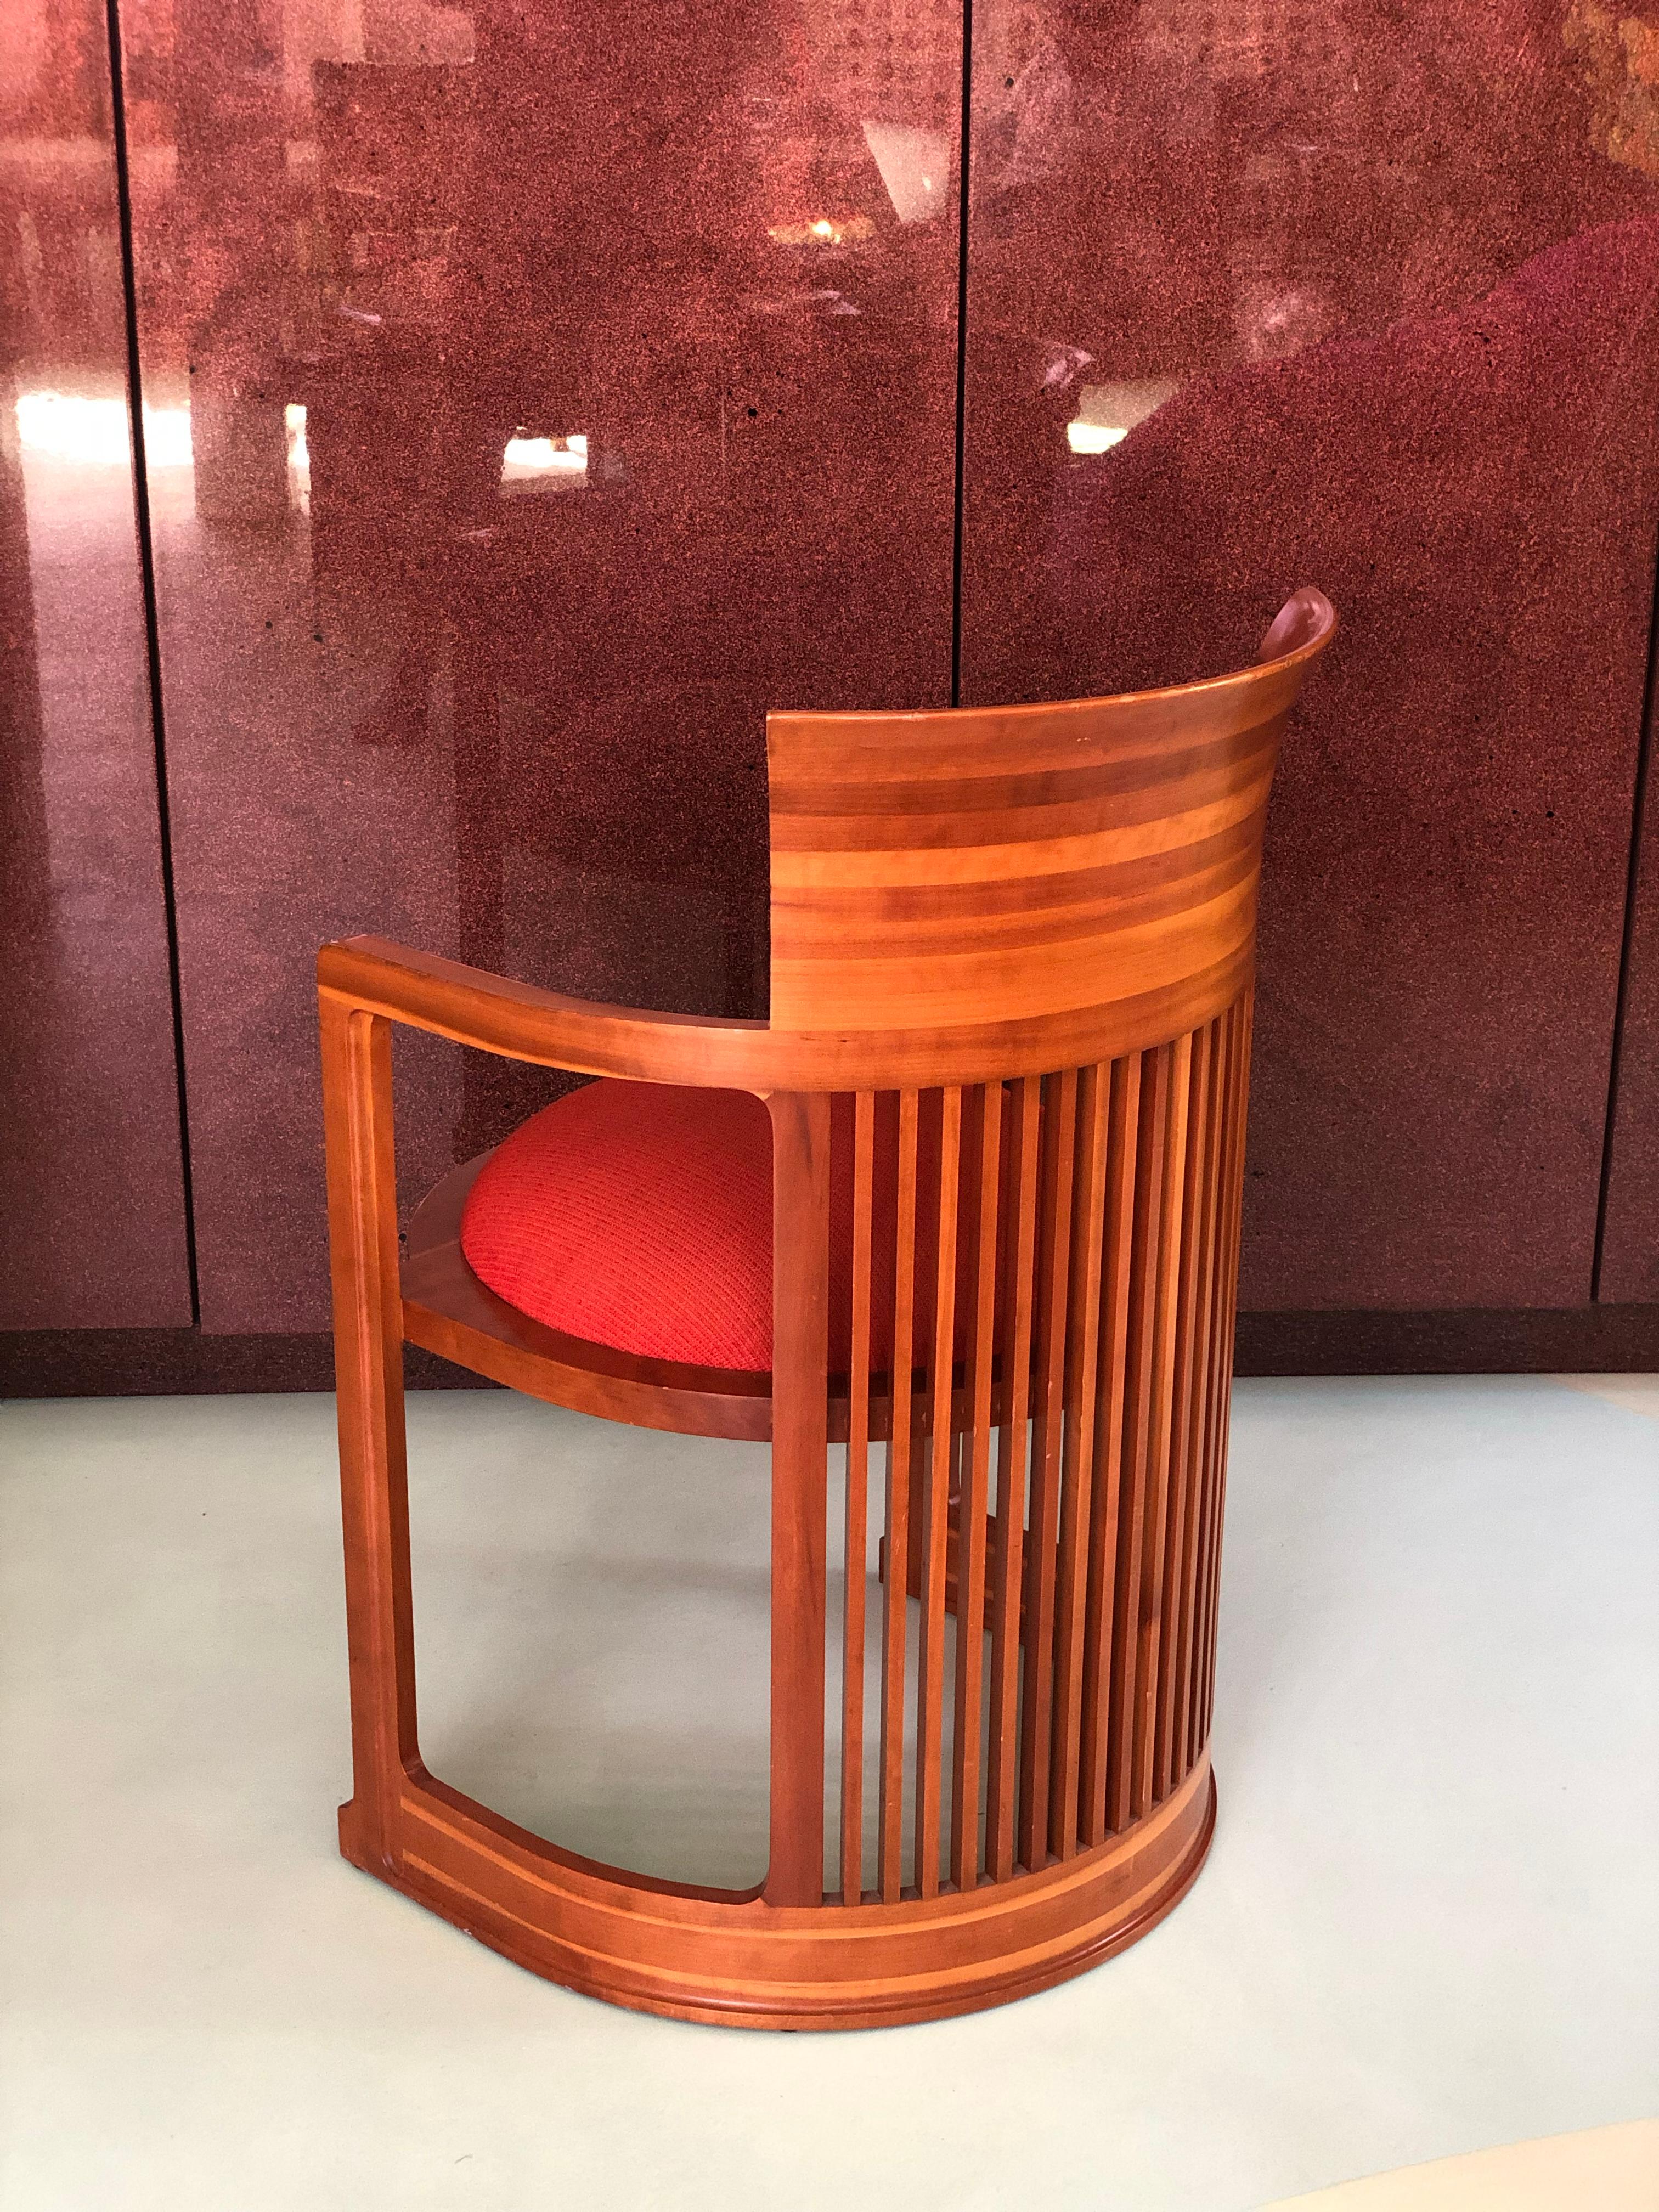 The “Barrel Chair”or “Taliesen Barrel Chair” by Frank Lloyd Wright was designed in 1937 after a design from 1904. It was designed Herbert Johnson’s house. It earns its name from the city Taliesin, Wisconsin where the famous Taliesin III House stands